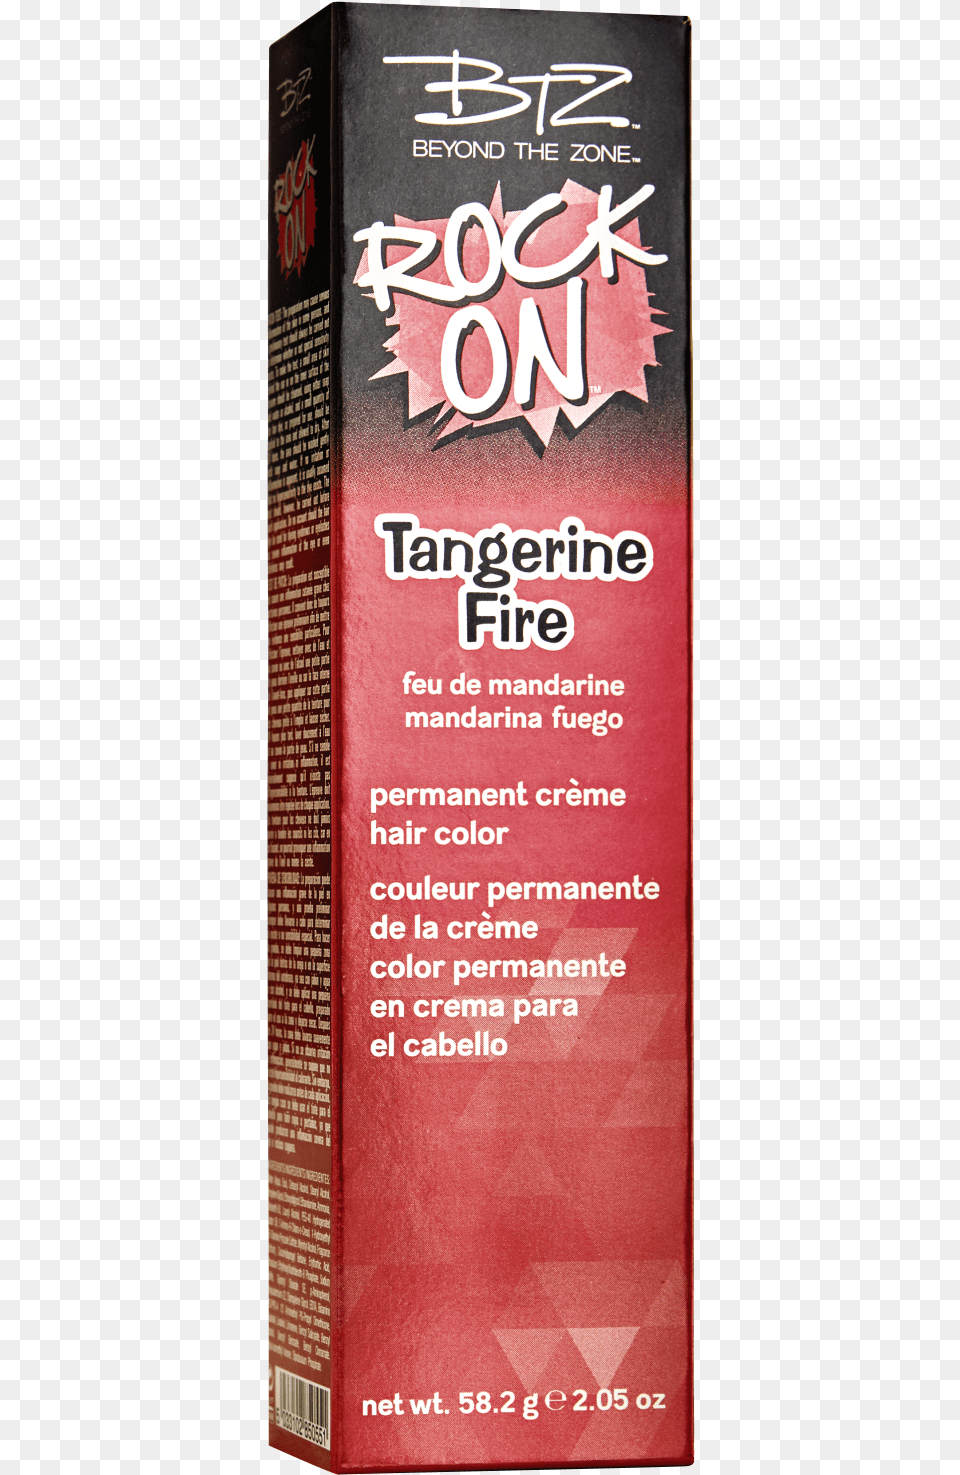 Beyond The Zone Tangerine Fire Permanent Creme Hair Rock On Sangria Pop Permanent Creme Hair Color, Advertisement, Book, Poster, Publication Png Image